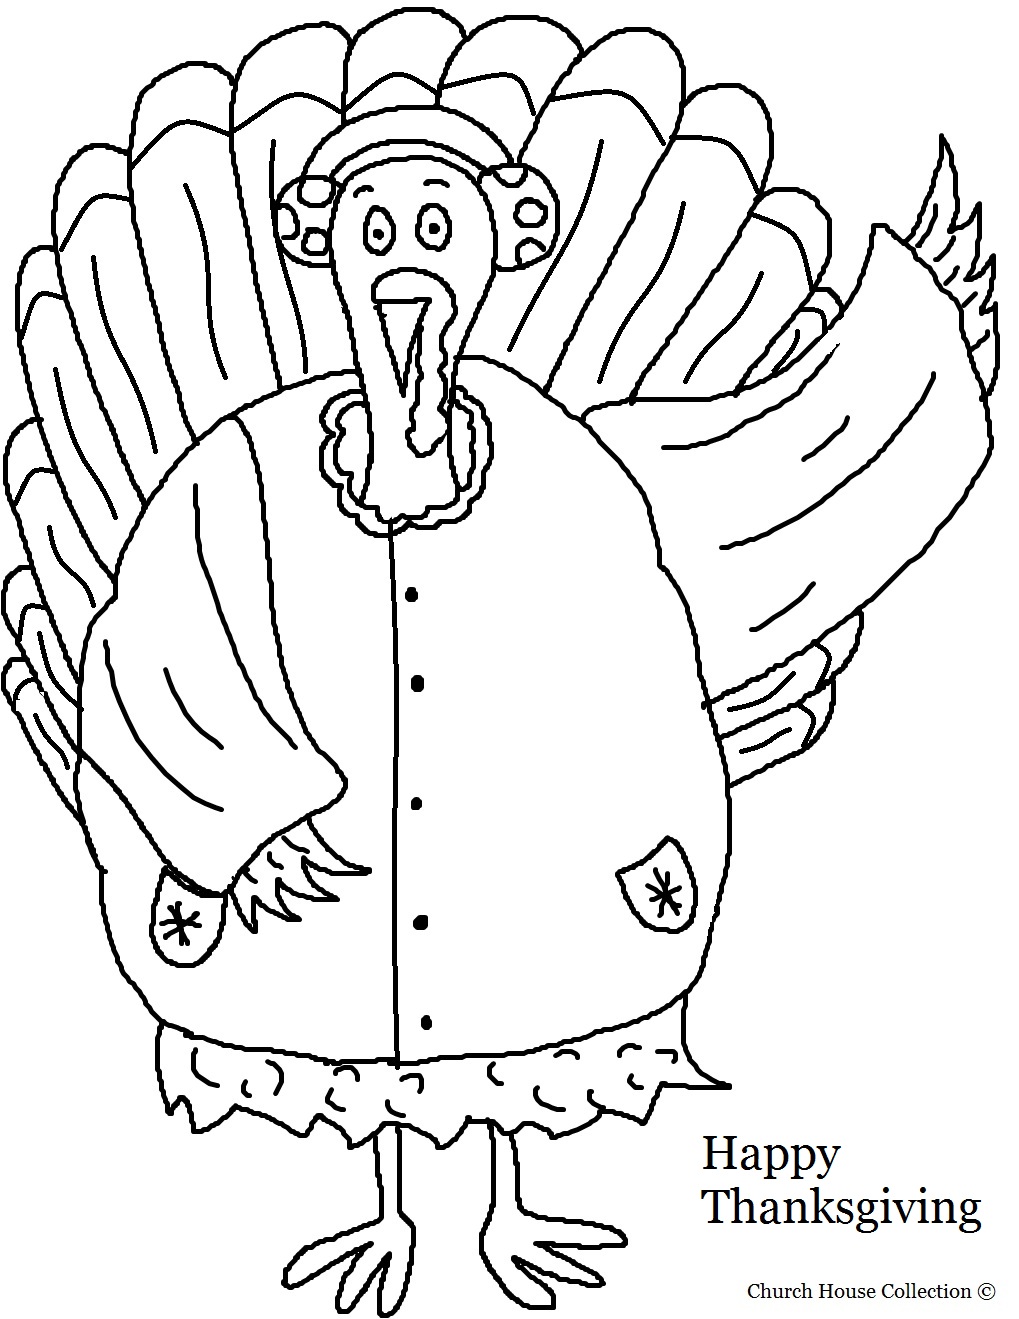 Church House Collection Blog: Turkey Wearing Winter Coat and Earmuffs Coloring Page